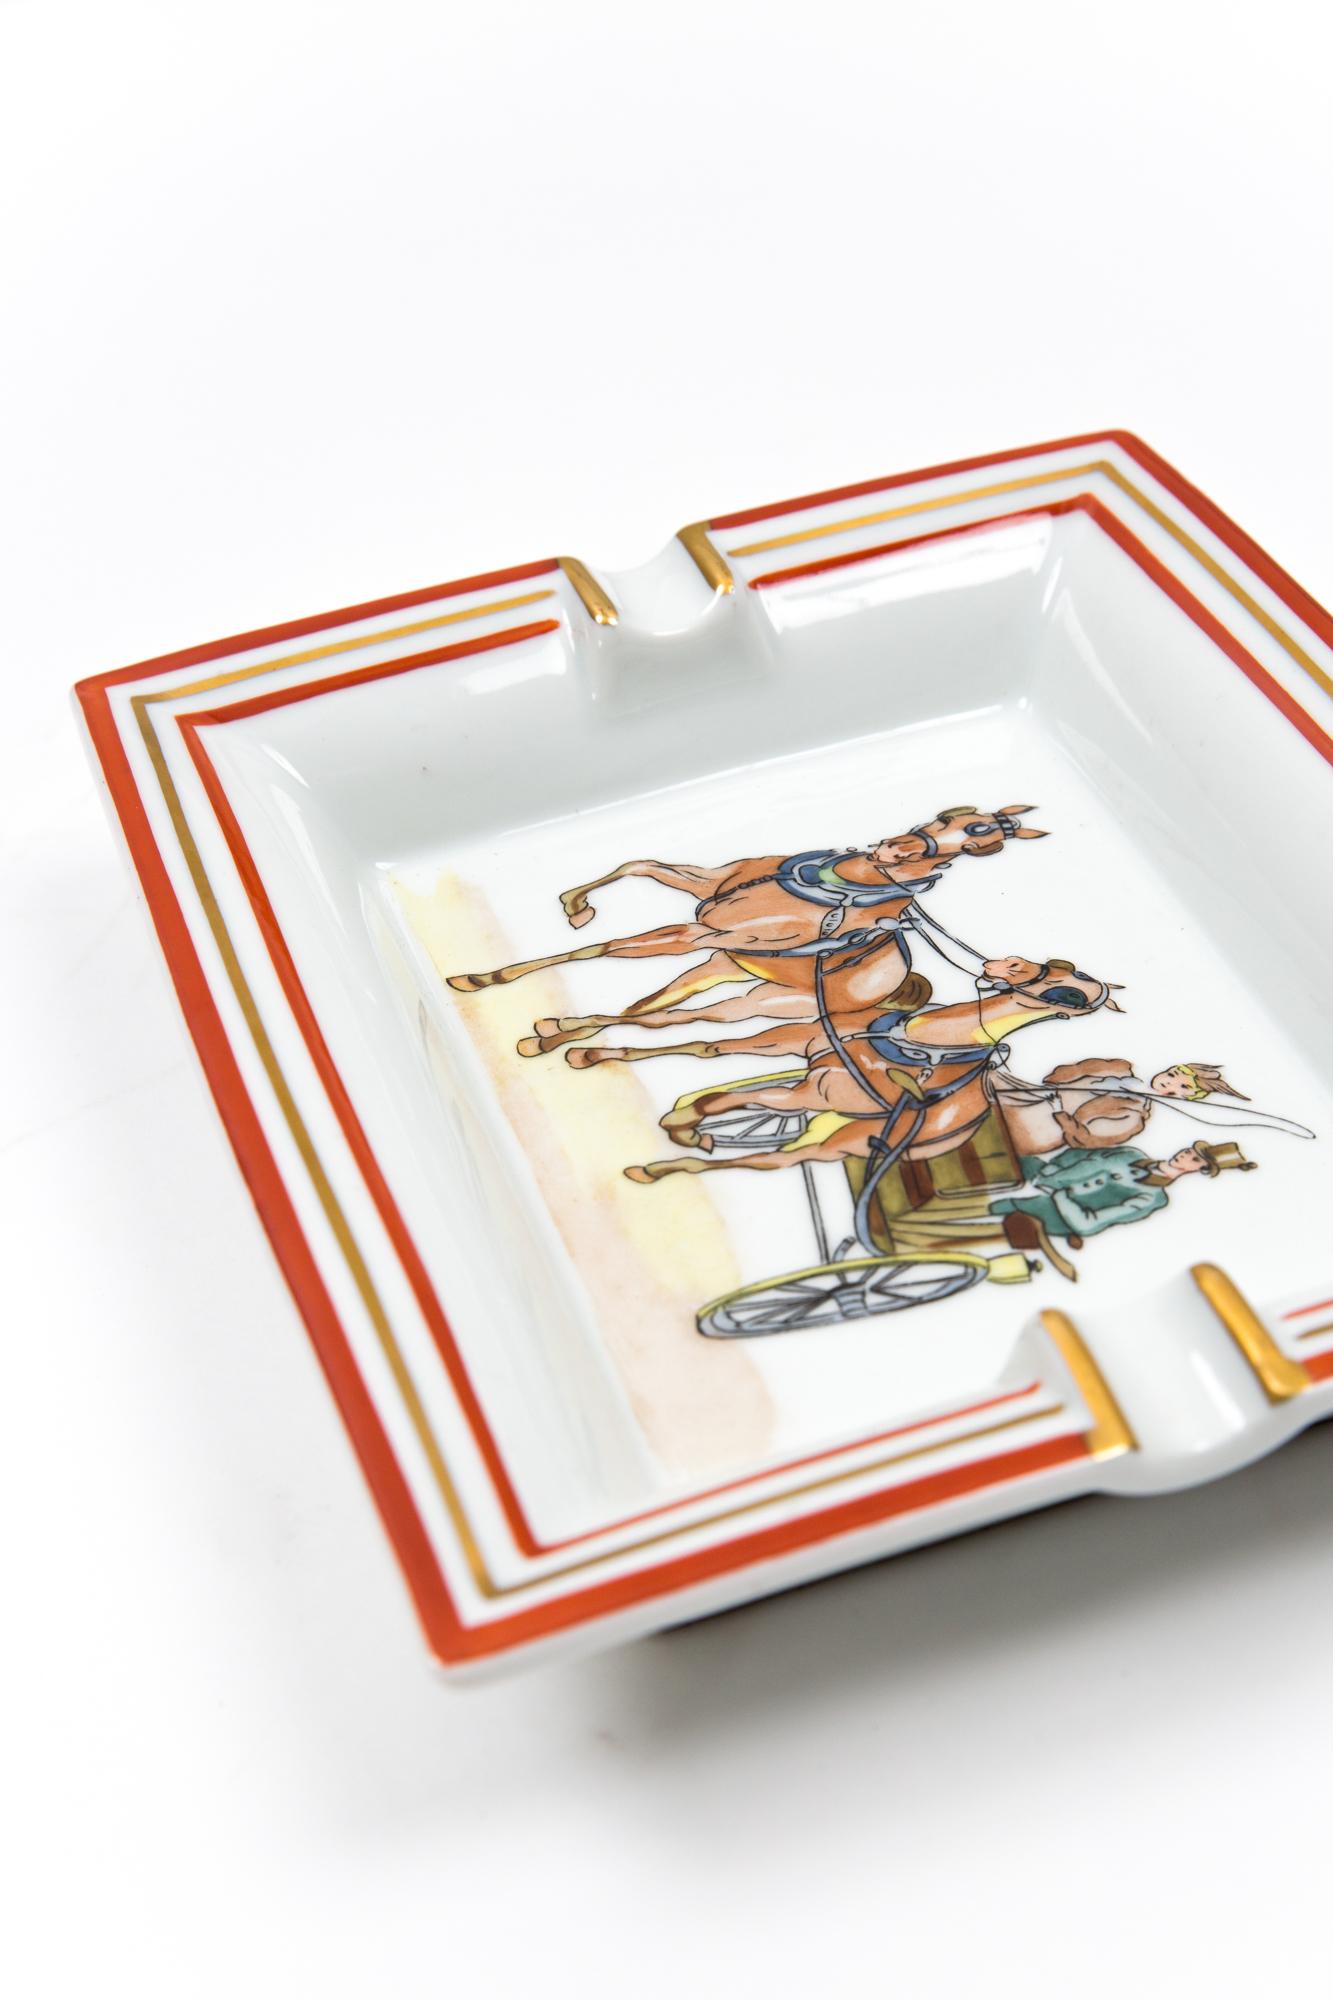 Hermès horse-print porcelain organizer or Ashtray featuring a a carriage, a gold brush finishing, a under leather bottom, a Hermes gold-tone side signature.  
Circa 1980s 
In good vintage condition. 
Maxi Length 7.4in (19cm)
Maxi height 6,3in.